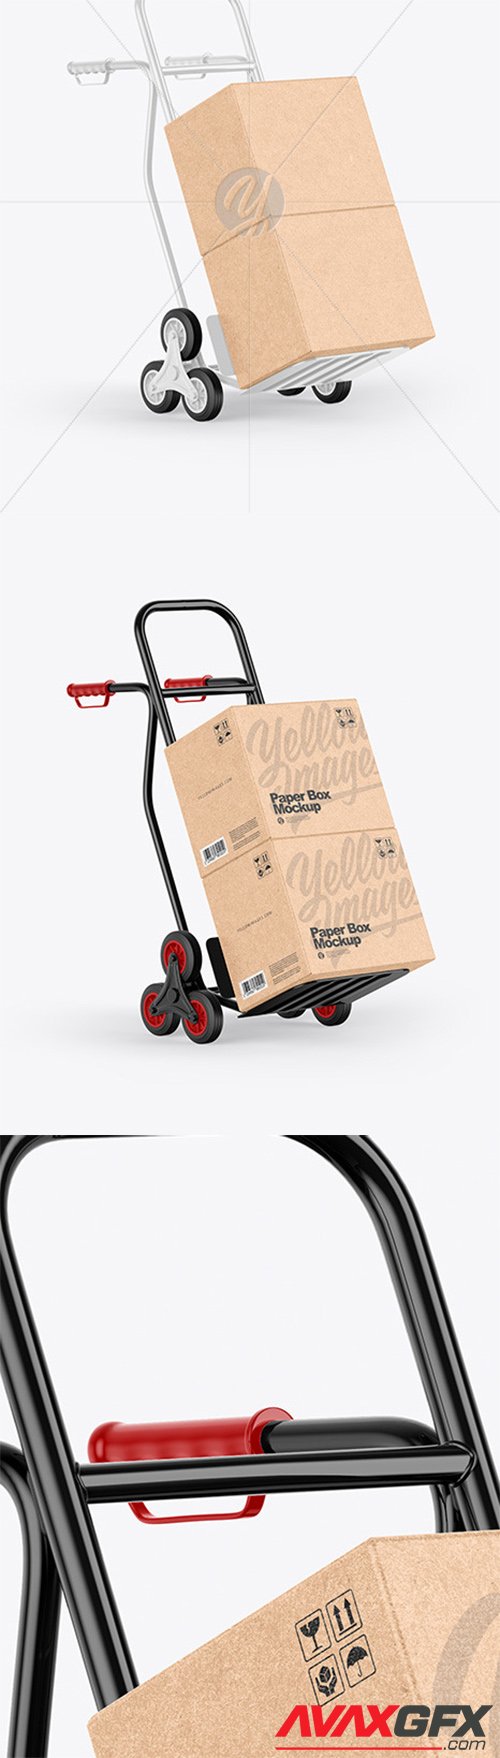 Download Hand Pallet Truck Kraft Box Mockup 60618 Avaxgfx All Downloads That You Need In One Place Graphic From Nitroflare Rapidgator Yellowimages Mockups